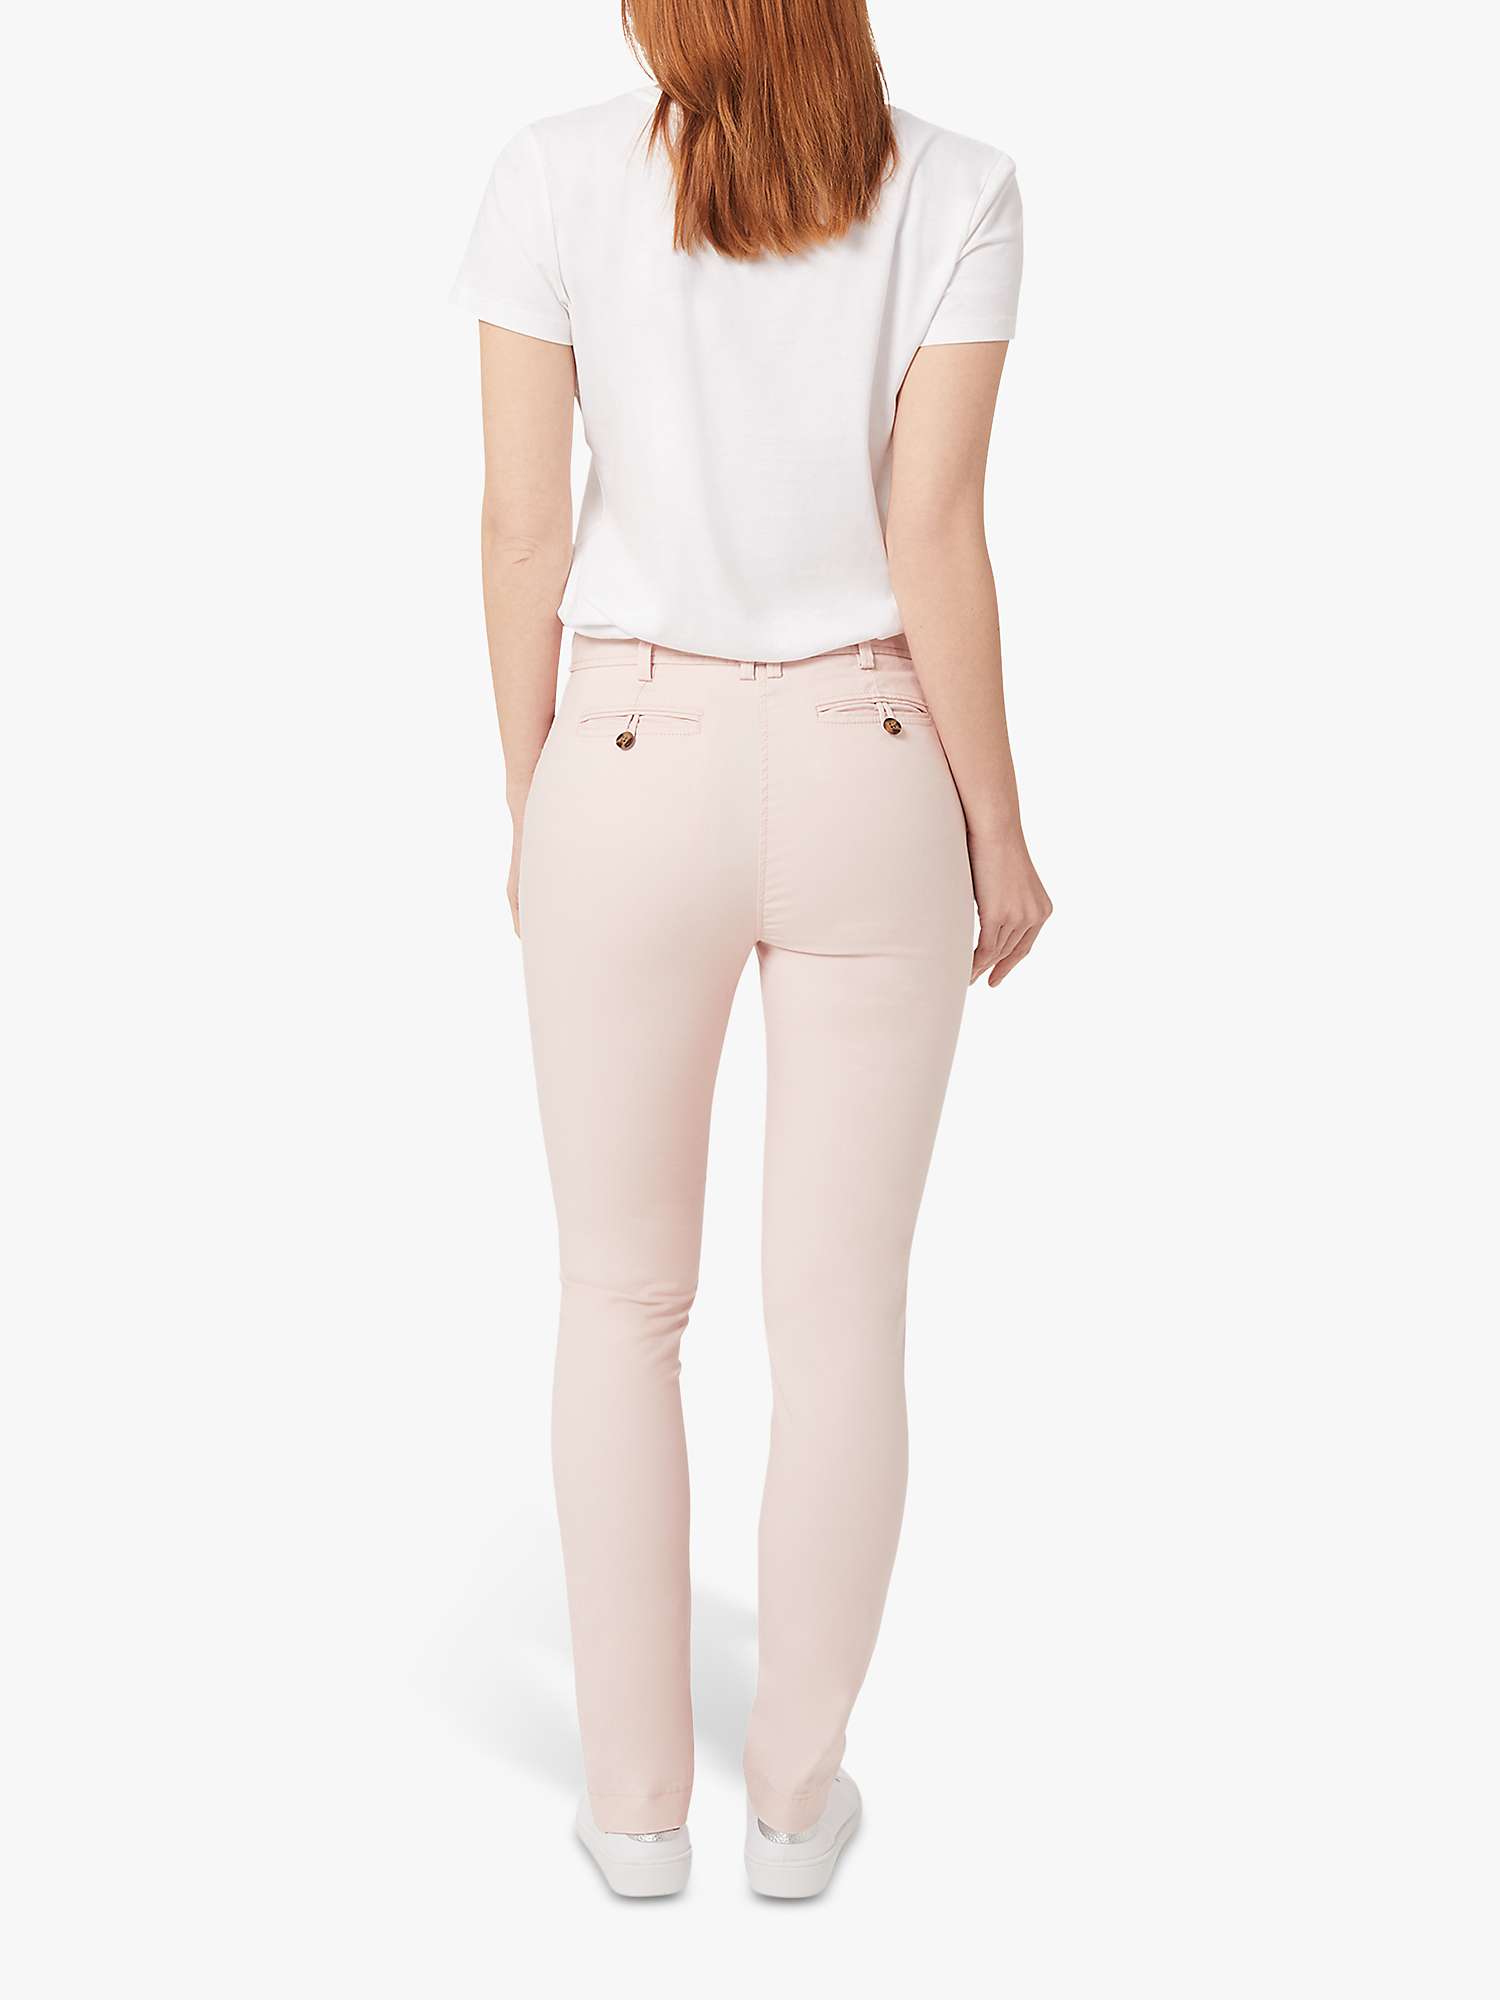 Buy Hobbs Pavilion Chino Trousers, Pale Pink Online at johnlewis.com